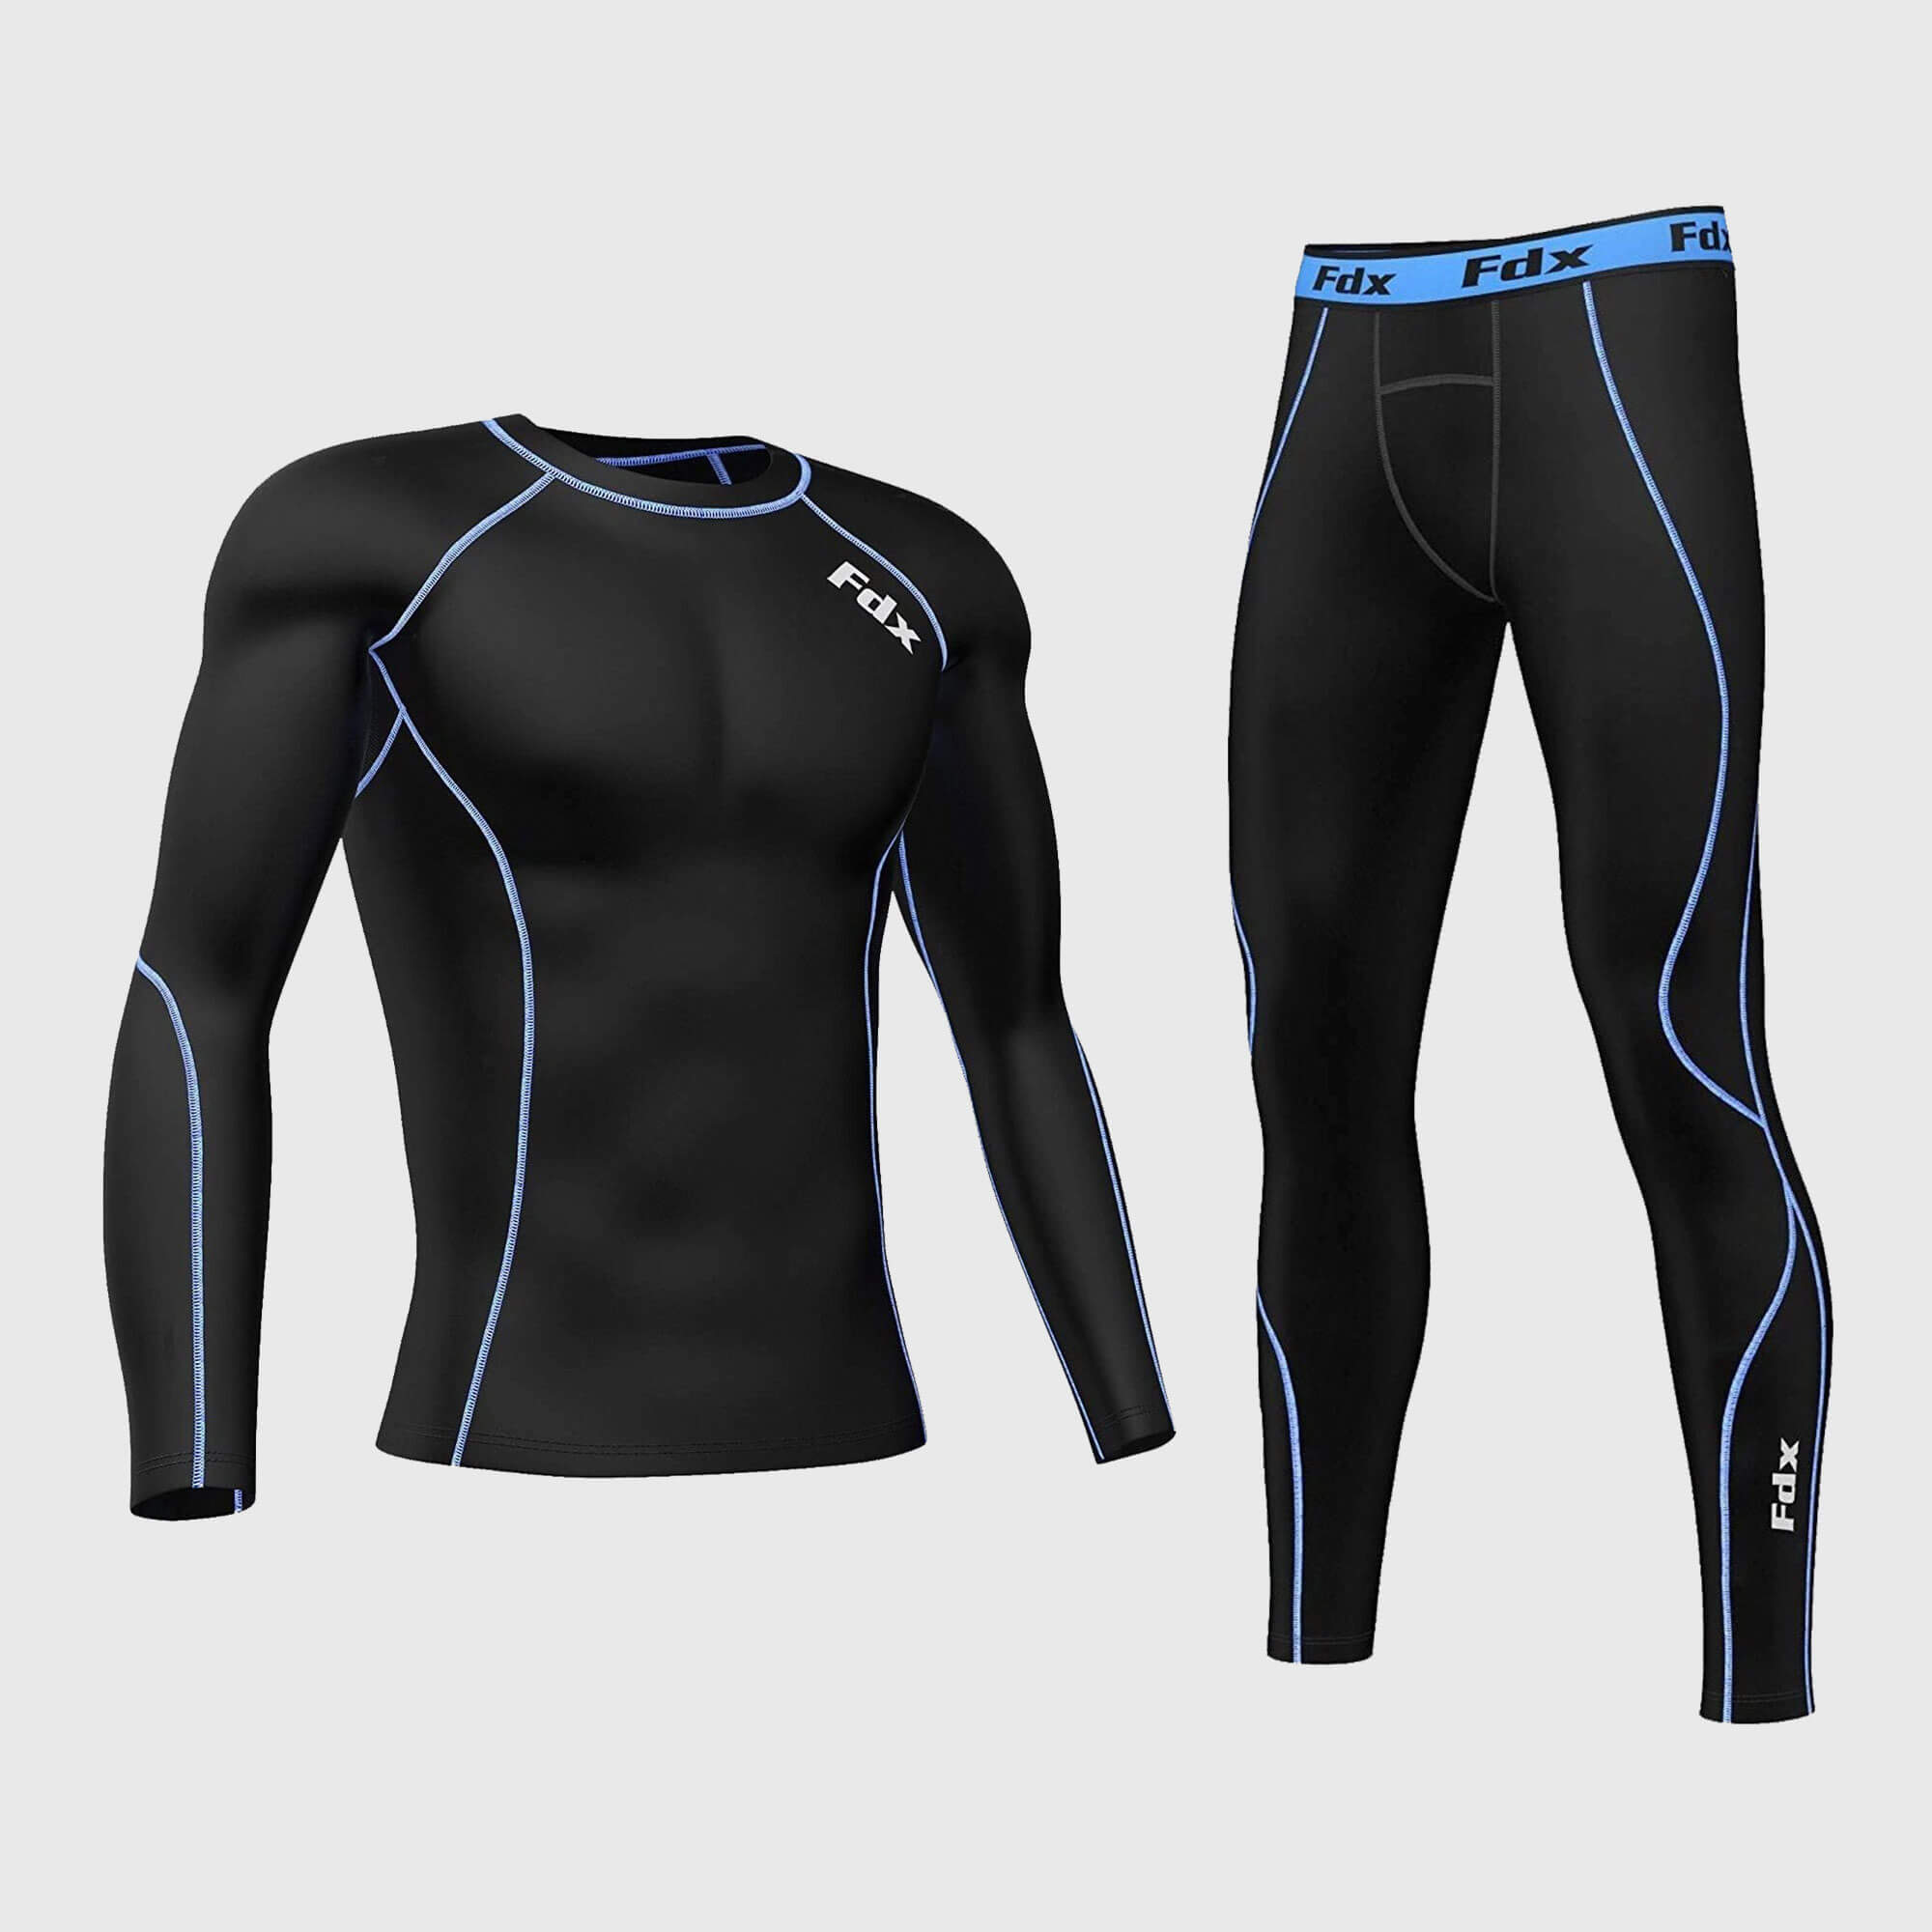 Fdx Men's Black & Blue Long Sleeve Compression Top & Compression Tights Base Layer Gym Training Jogging Yoga Fitness Body Wear - Blitz